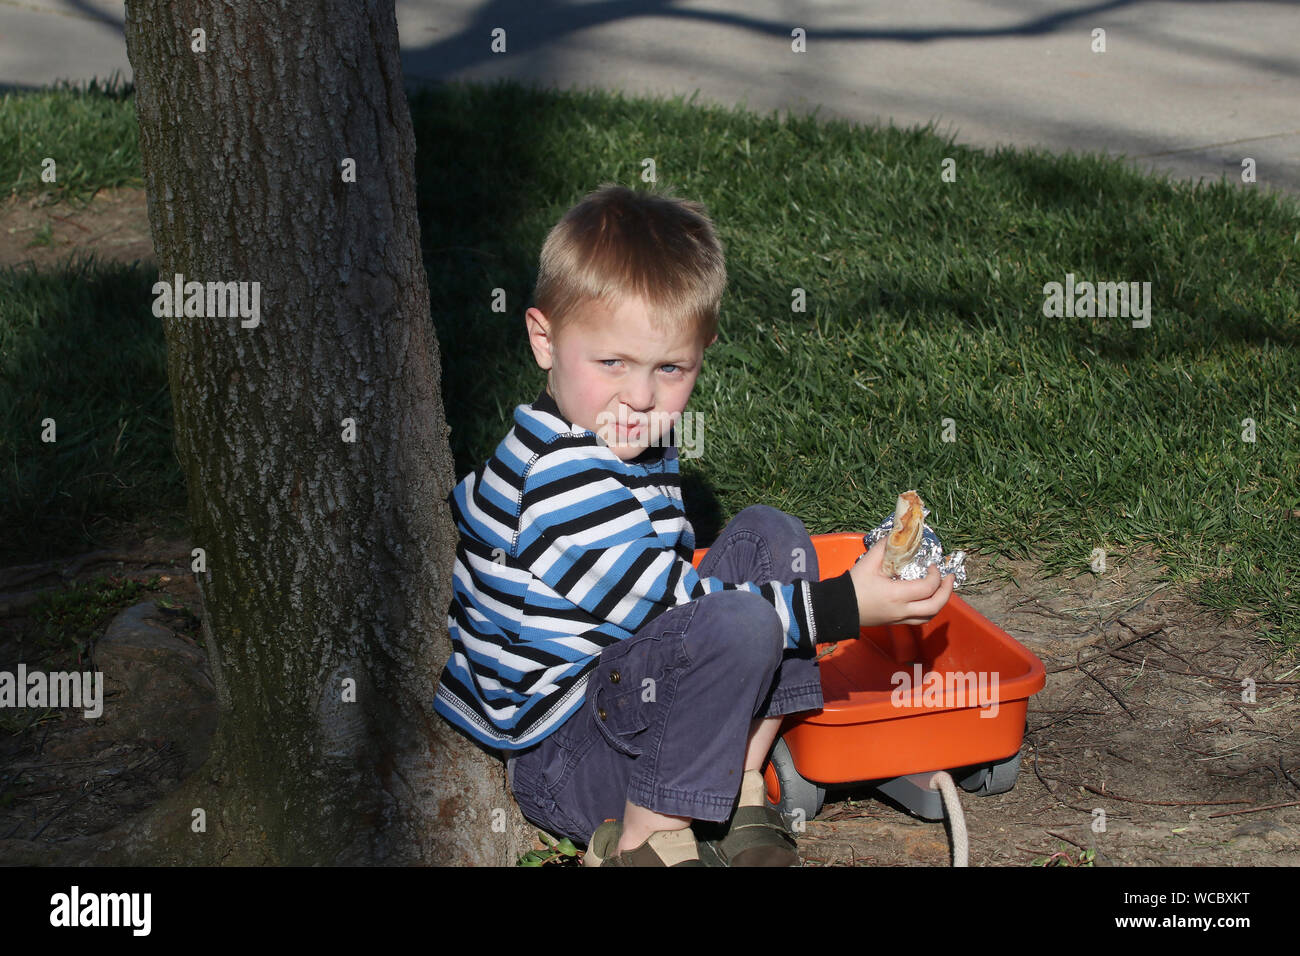 Young boy sneaking a burrito from the table hiding. Stock Photo